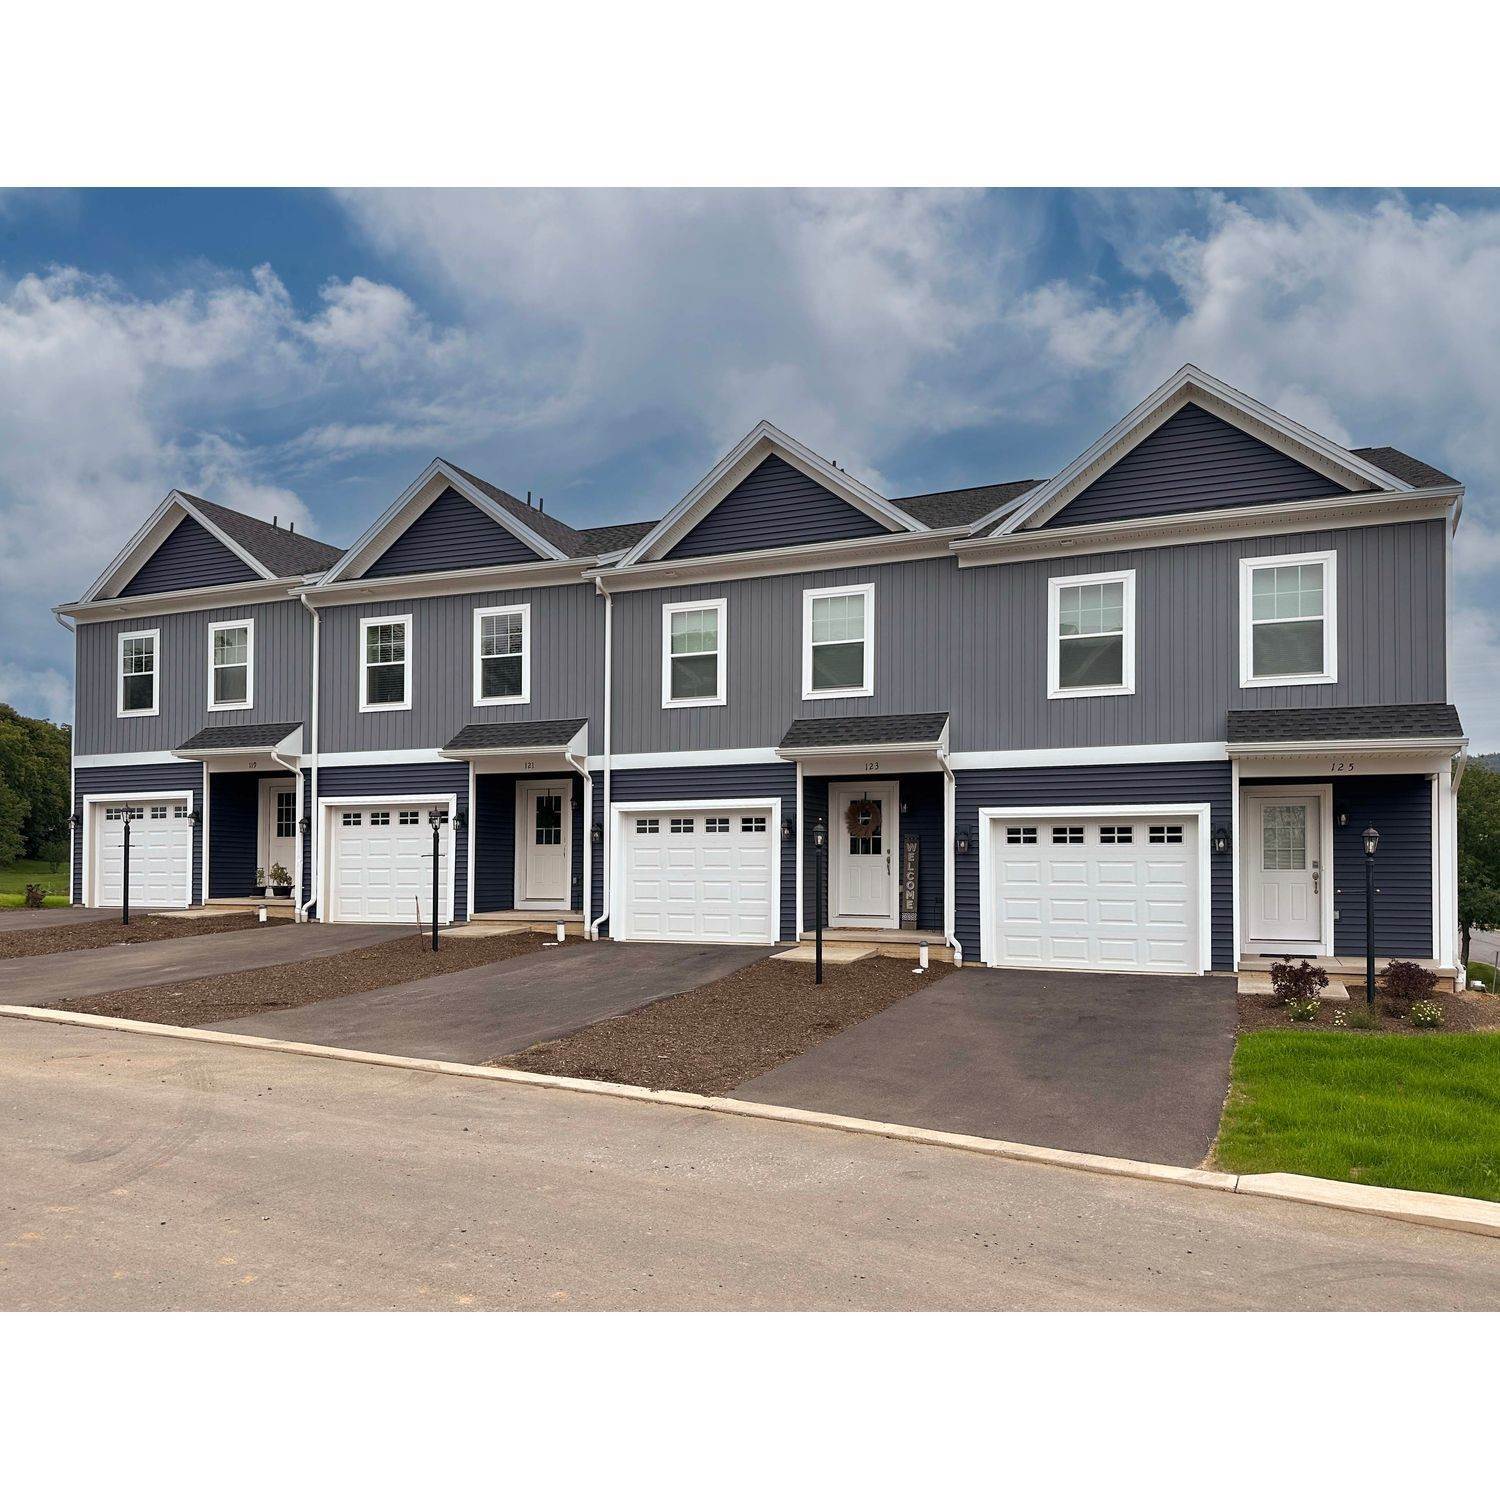 Steeplechase Townhomes building at 00 Highpoint Park Drive, Pleasant Gap, PA 16823